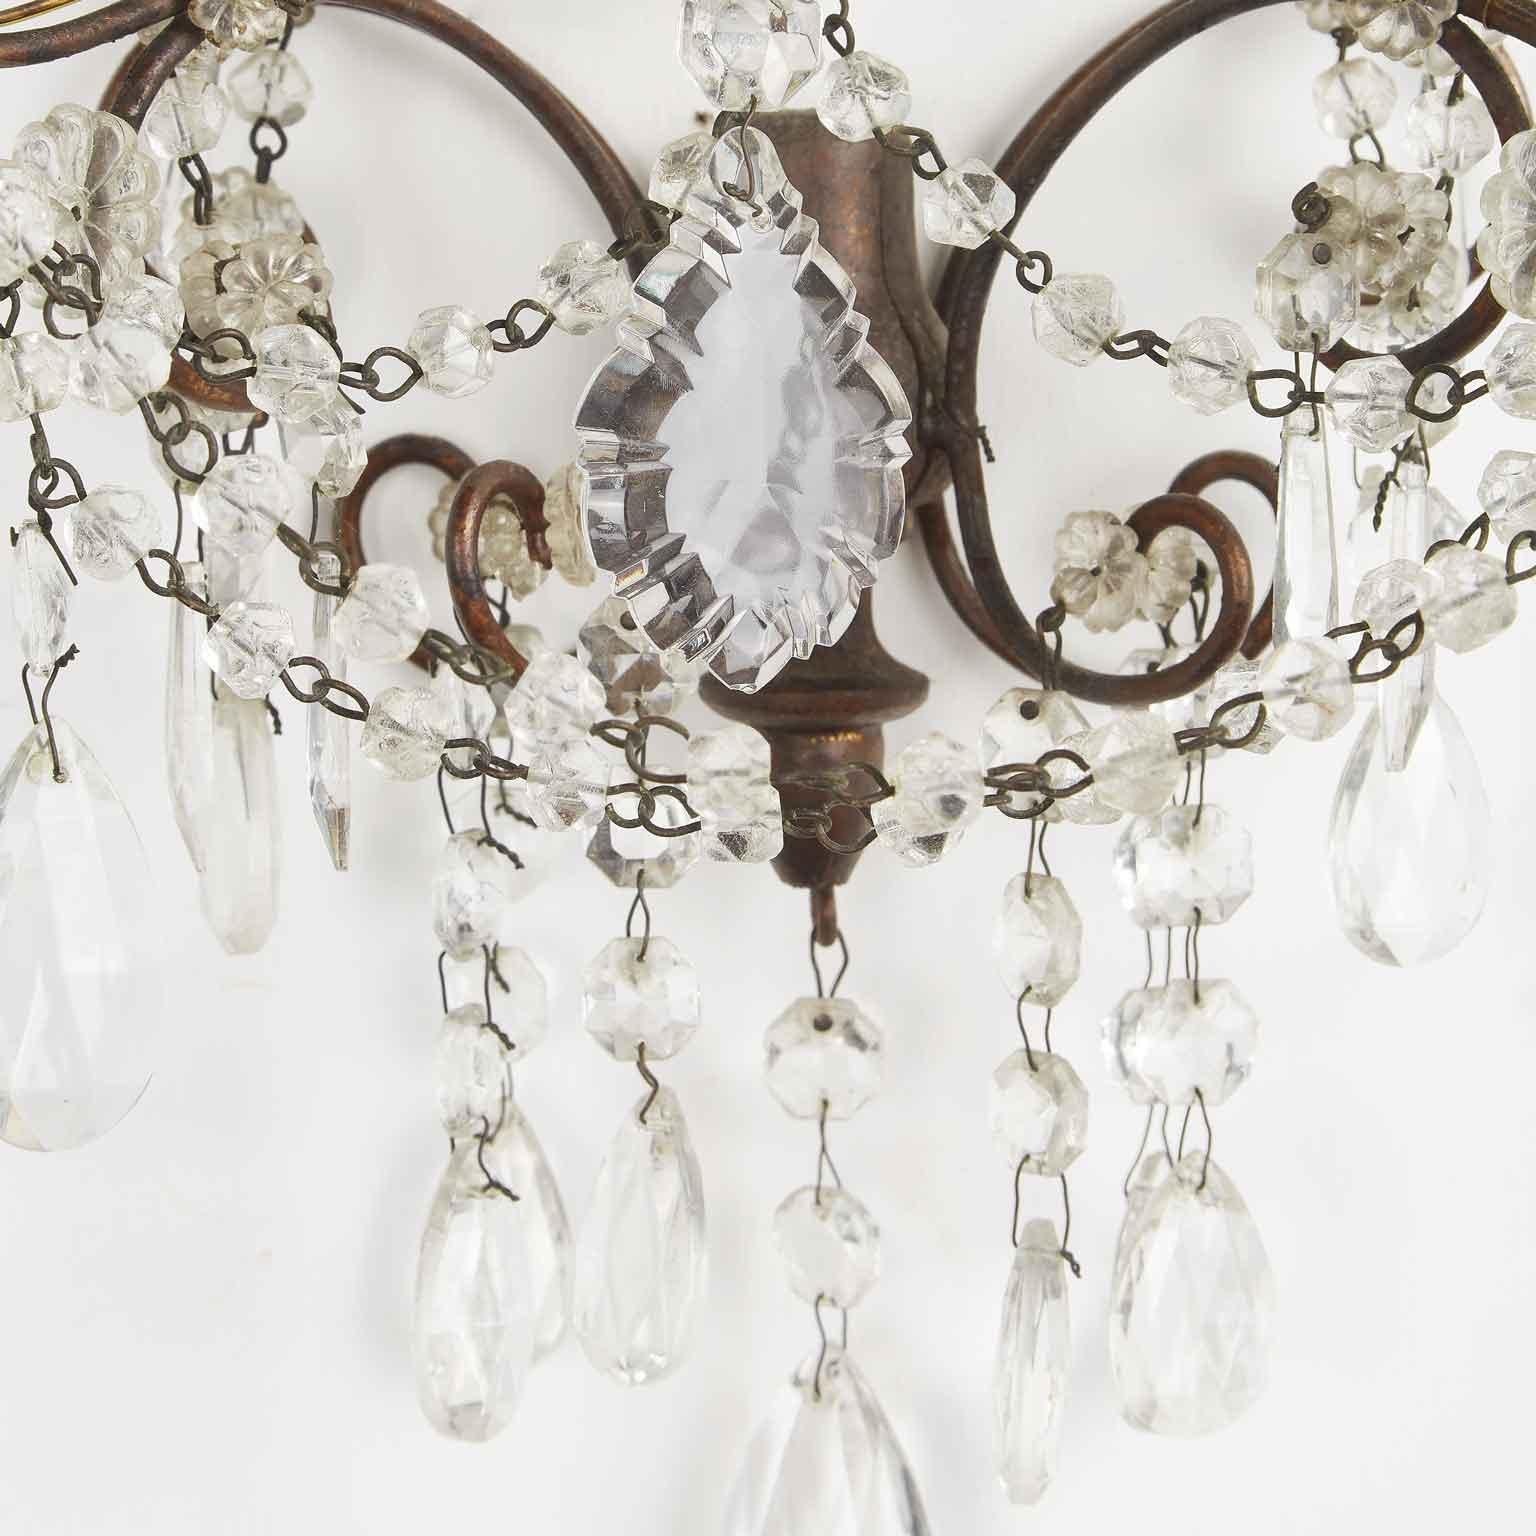 20th Century Pair of Italian Iron and Crystal Sconces from Tuscany 1950s